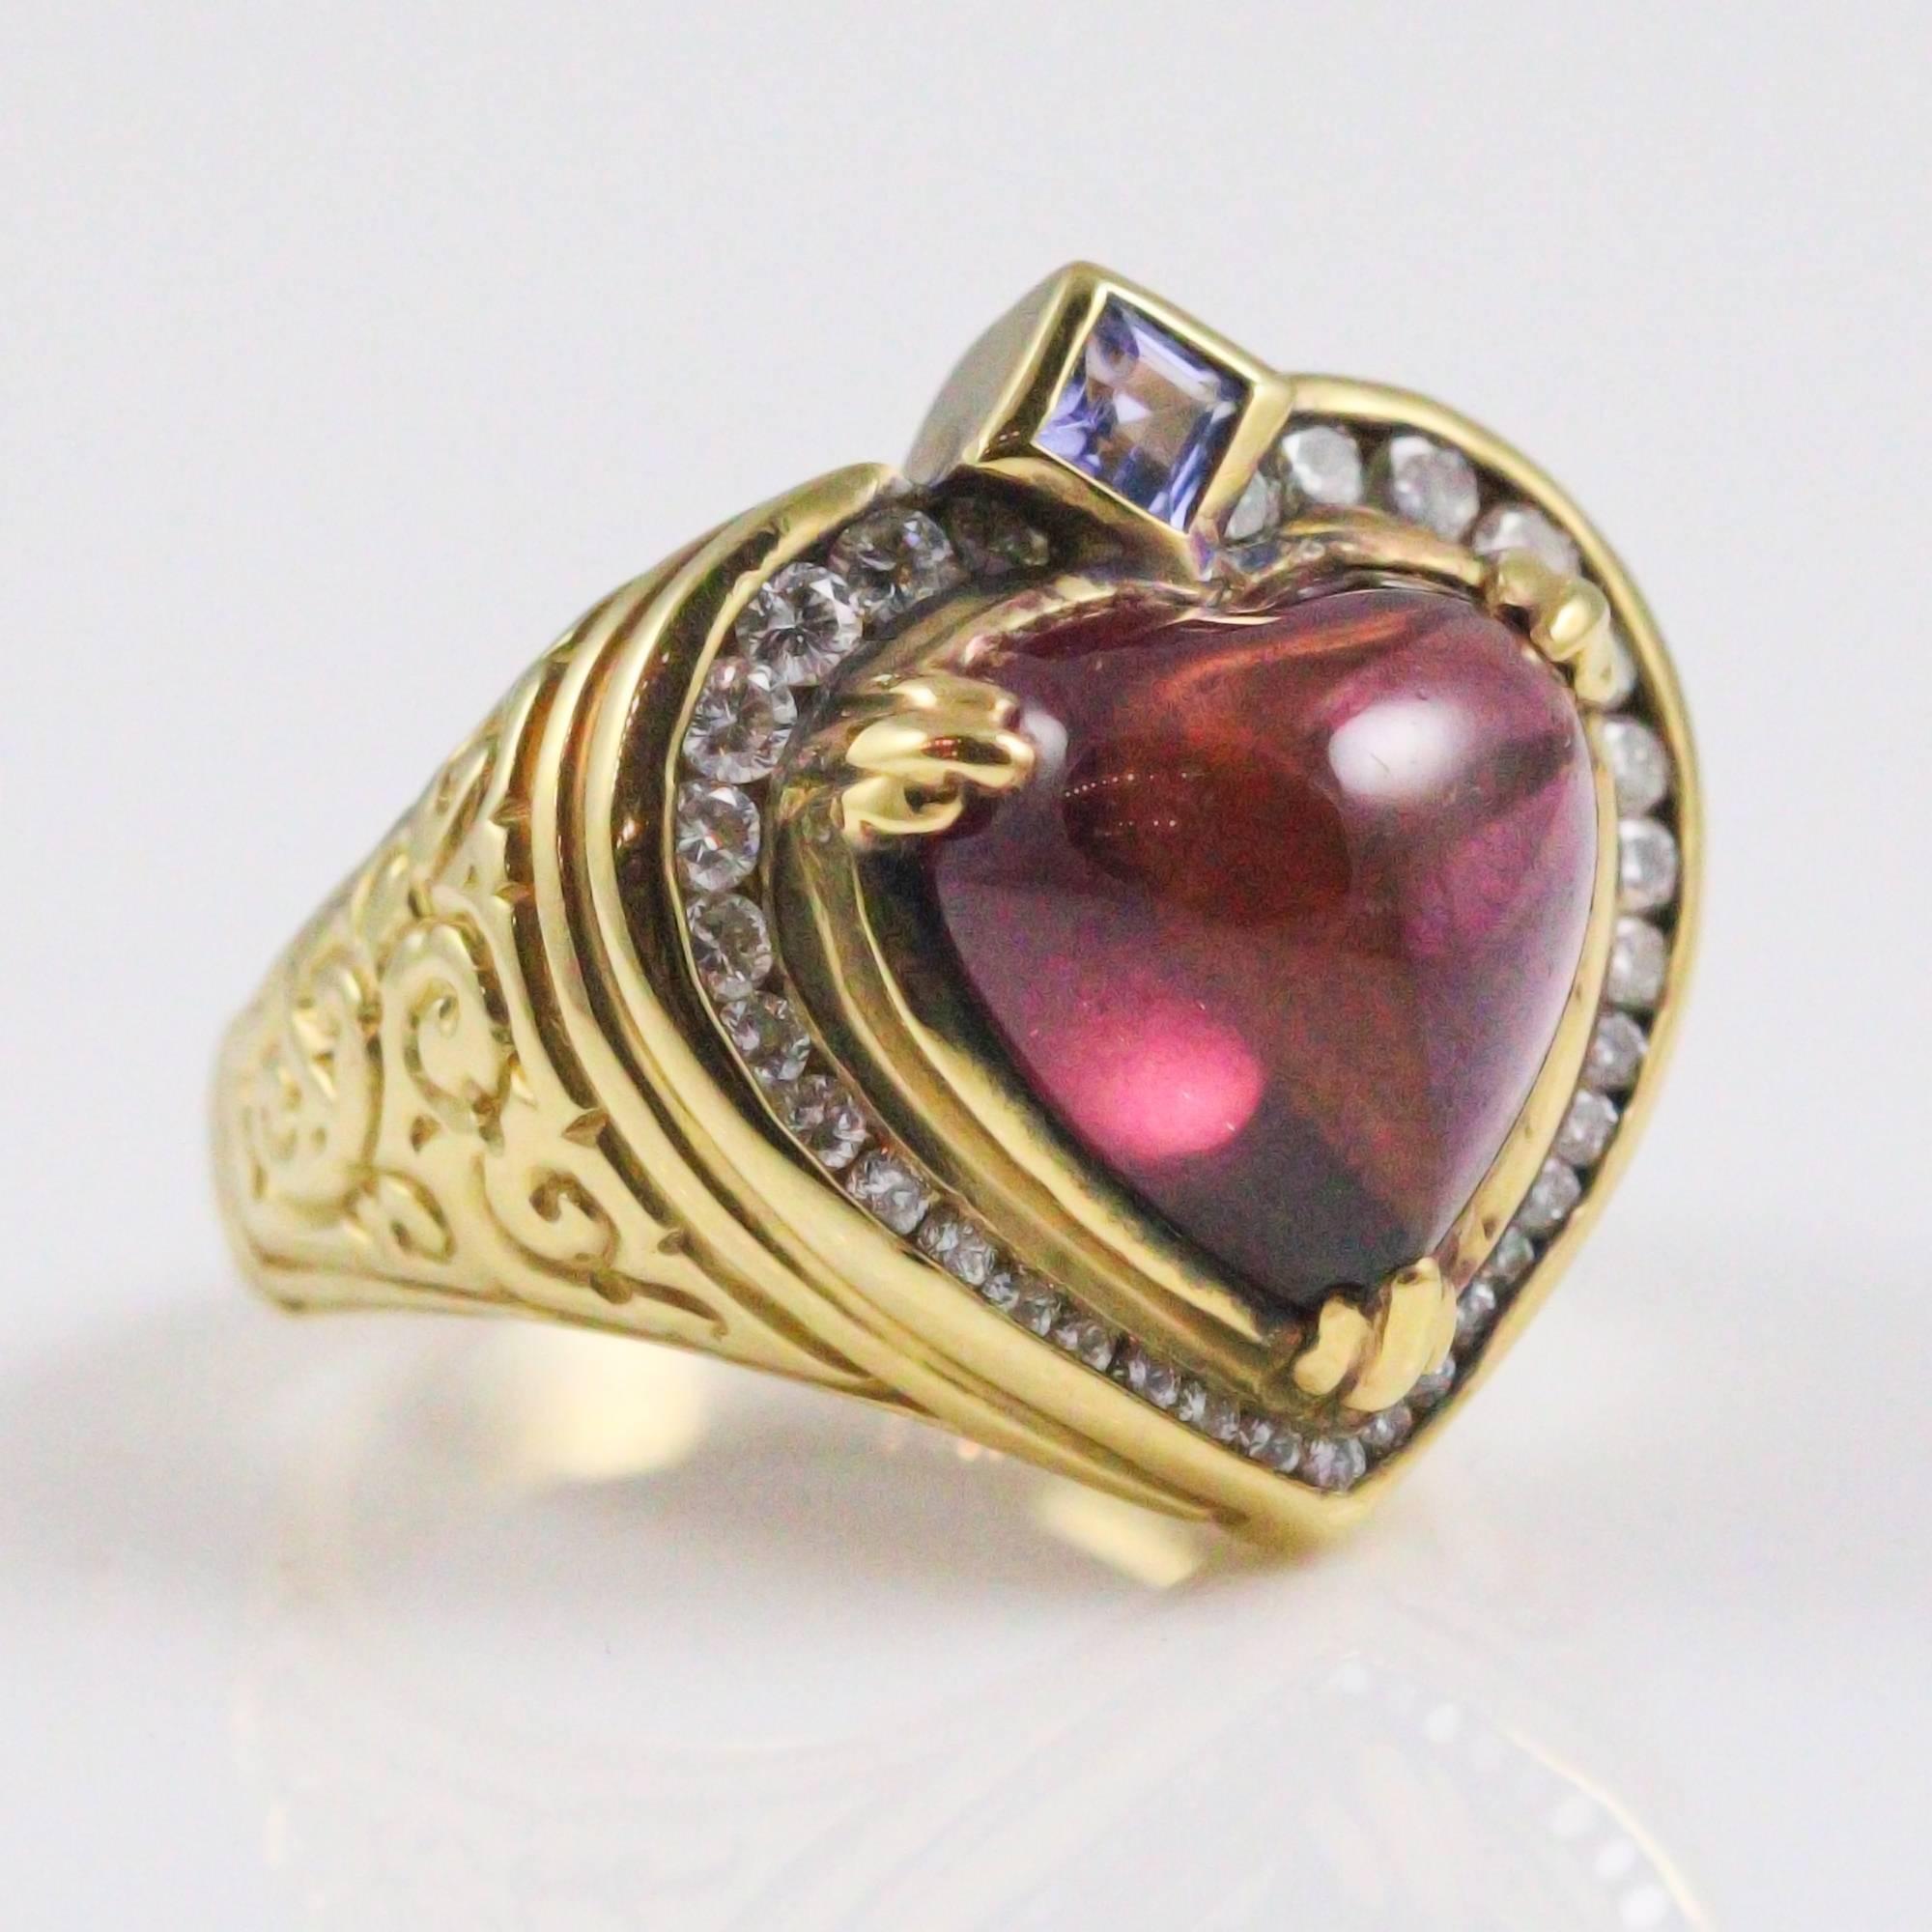 This beautiful ring by the designer, Seidengang, is constructed in 18k yellow gold focusing on a cabochon cut heart shaped rubellite tourmaline. The center stone is surrounded by a halo of 31 round brilliant cut diamonds (0.60ctw, F-G, VS) and a